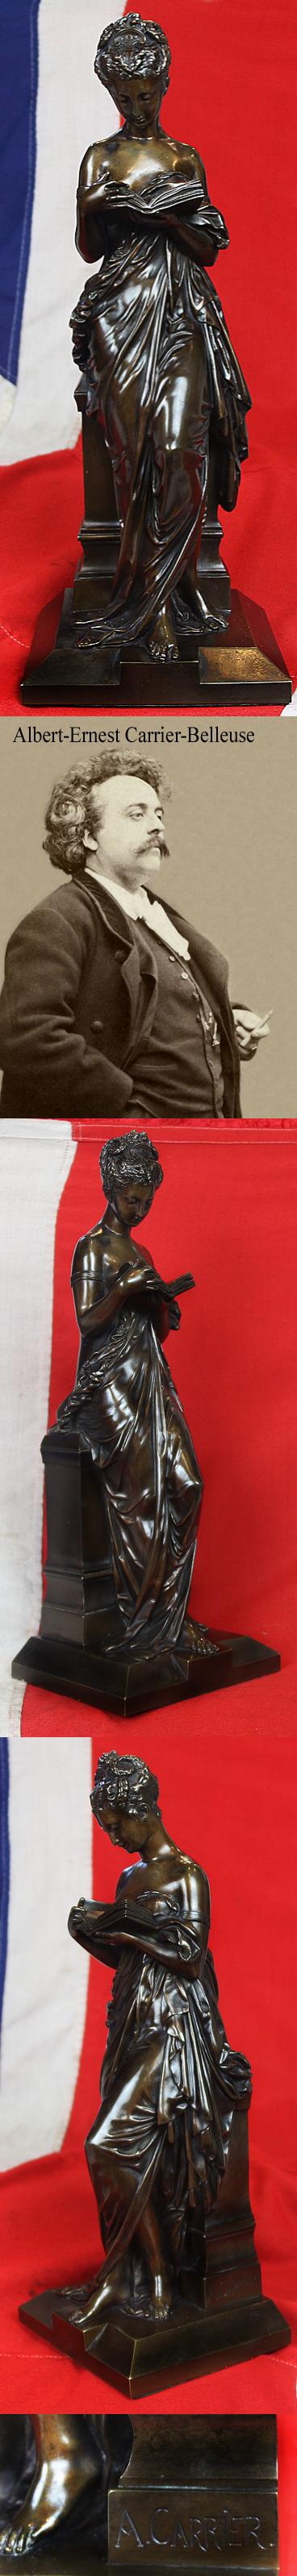 An Absolutely Stunning Napoleon IIIrd, French Bronze. The Woman Reading, ‘La Liseuse’ by World Renown Sculptor, Albert-Ernest Carrier-Belleuse, Mentor to His Apprentice Auguste Rodin Who Became One of The Worlds Most Famous and Valued Sculptors